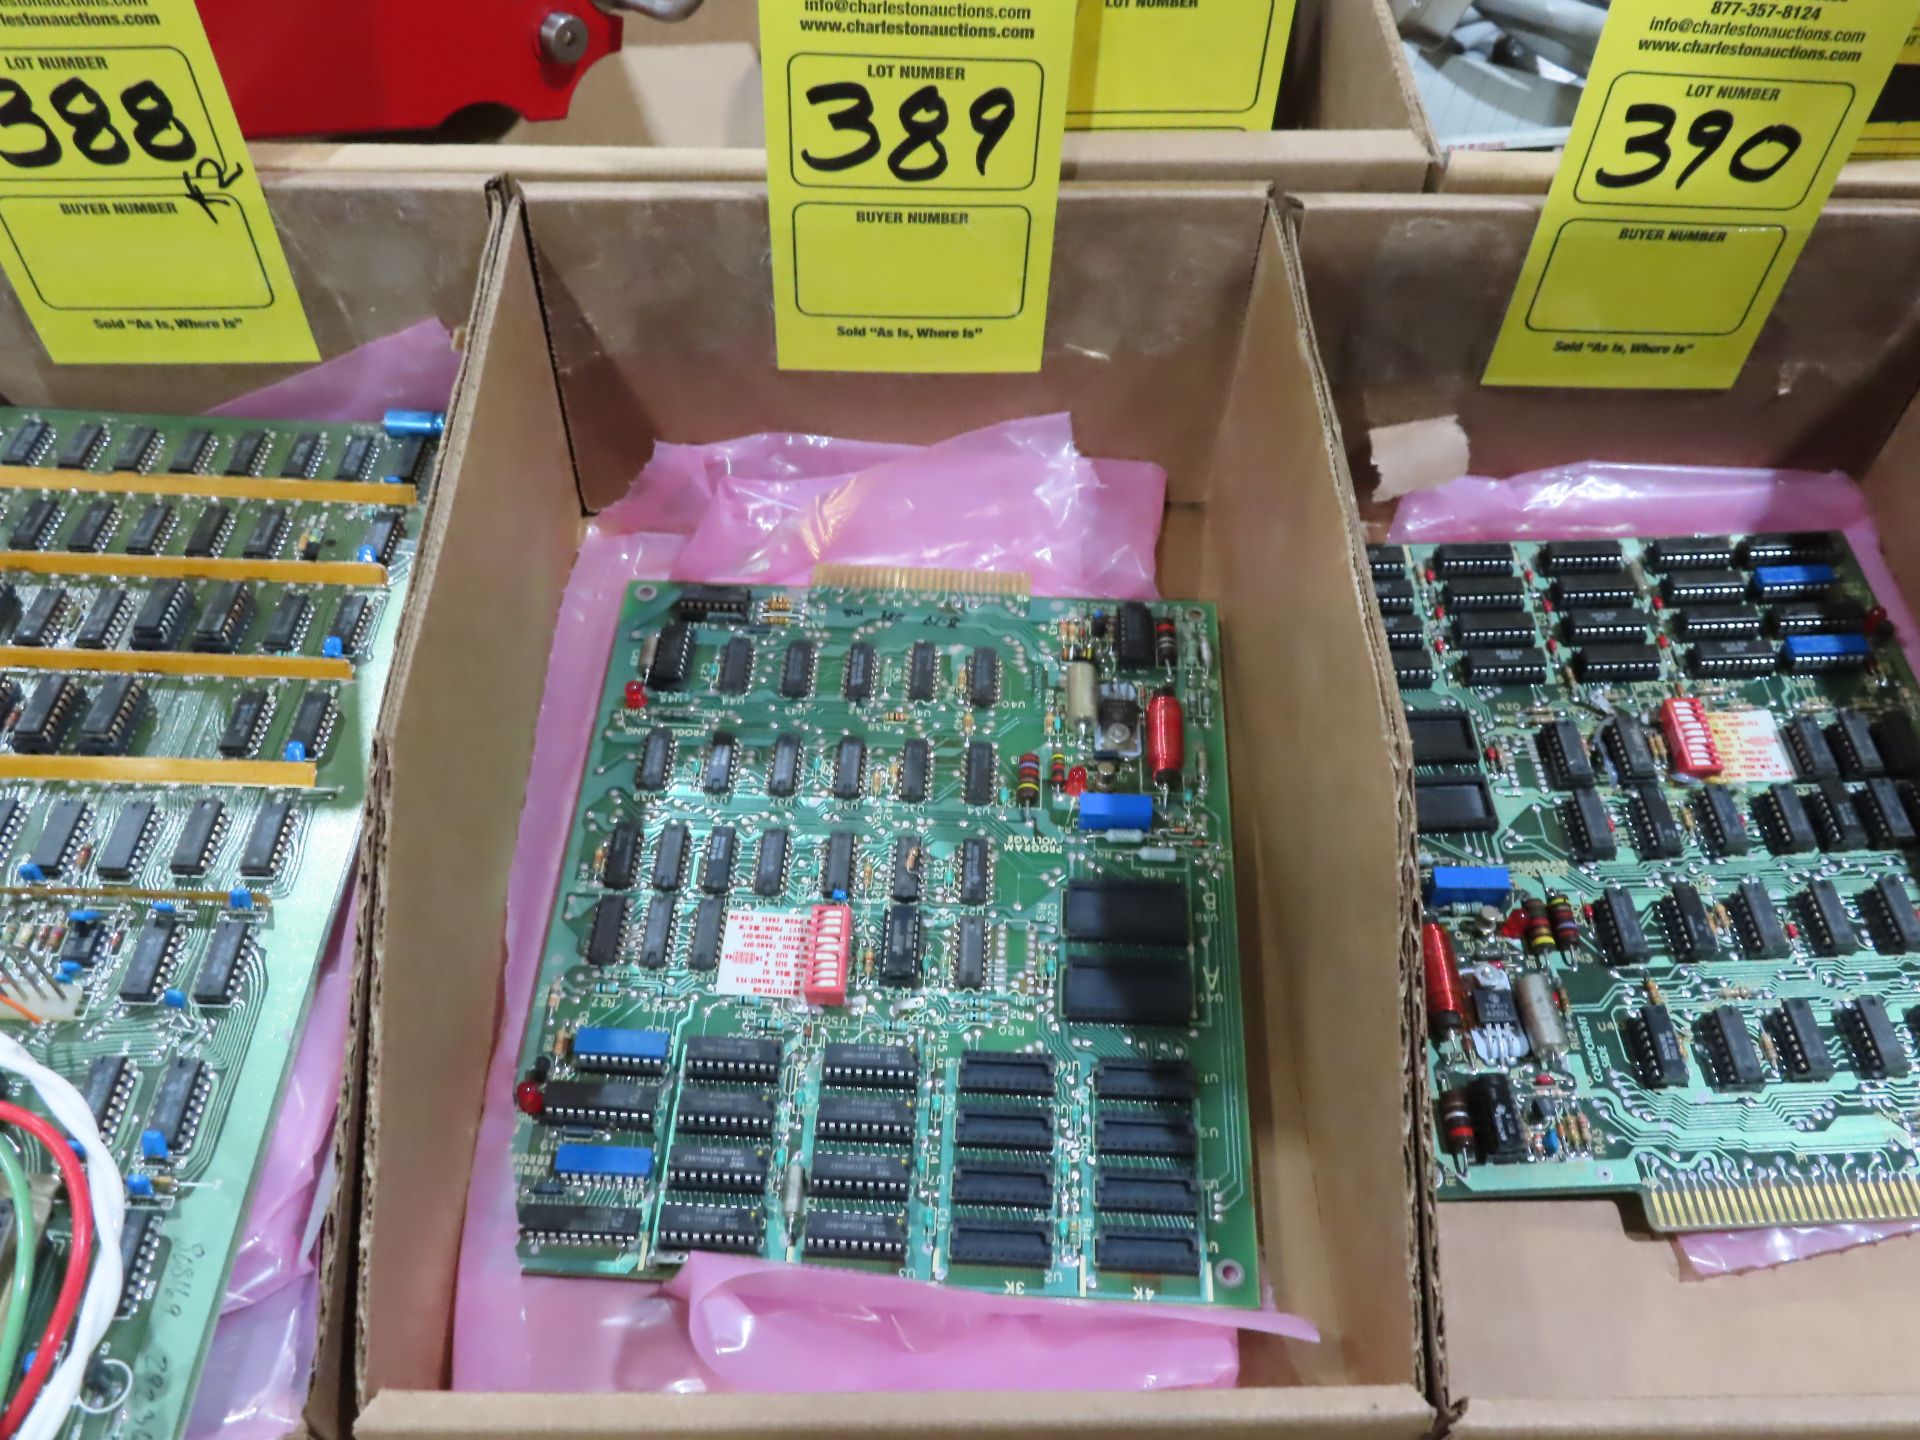 Texas instruments 2459003-1 memory assembly board, as always, with Brolyn LLC auctions, all lots can